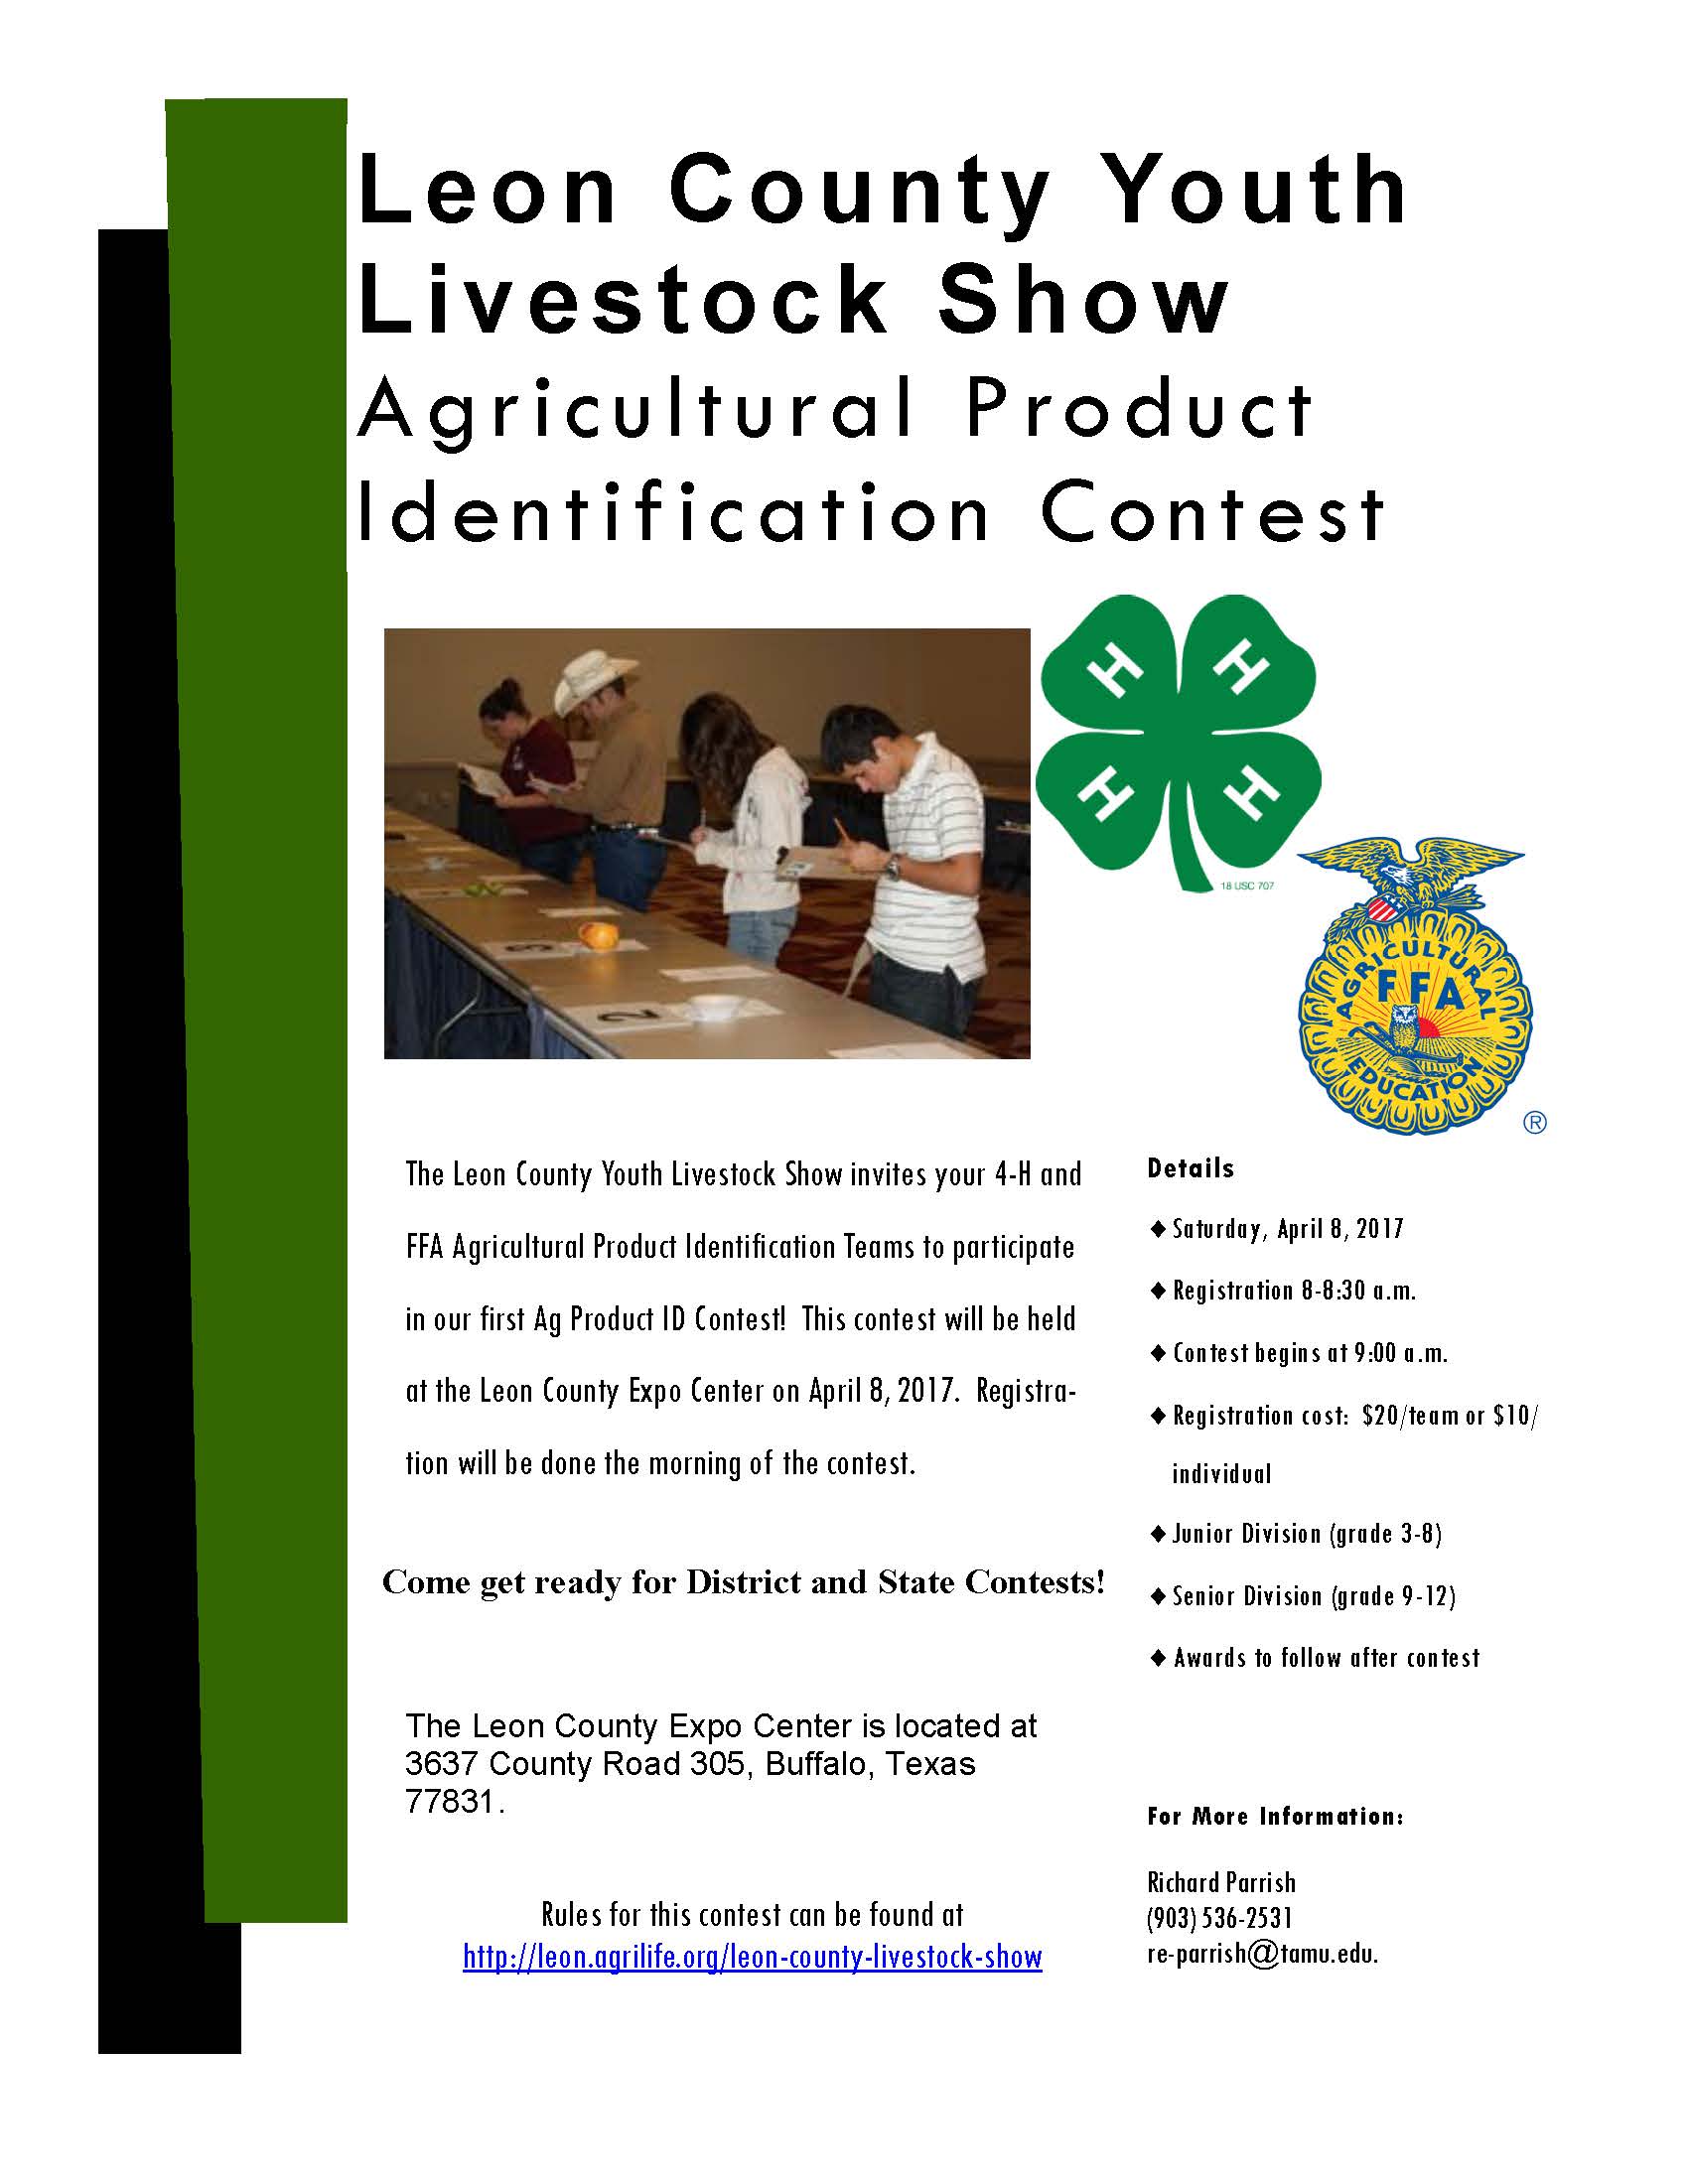 Leon County Ag Product ID will host a contest on April 8th in Buffalo, TX.  This event is open to FFA and 4-H members.